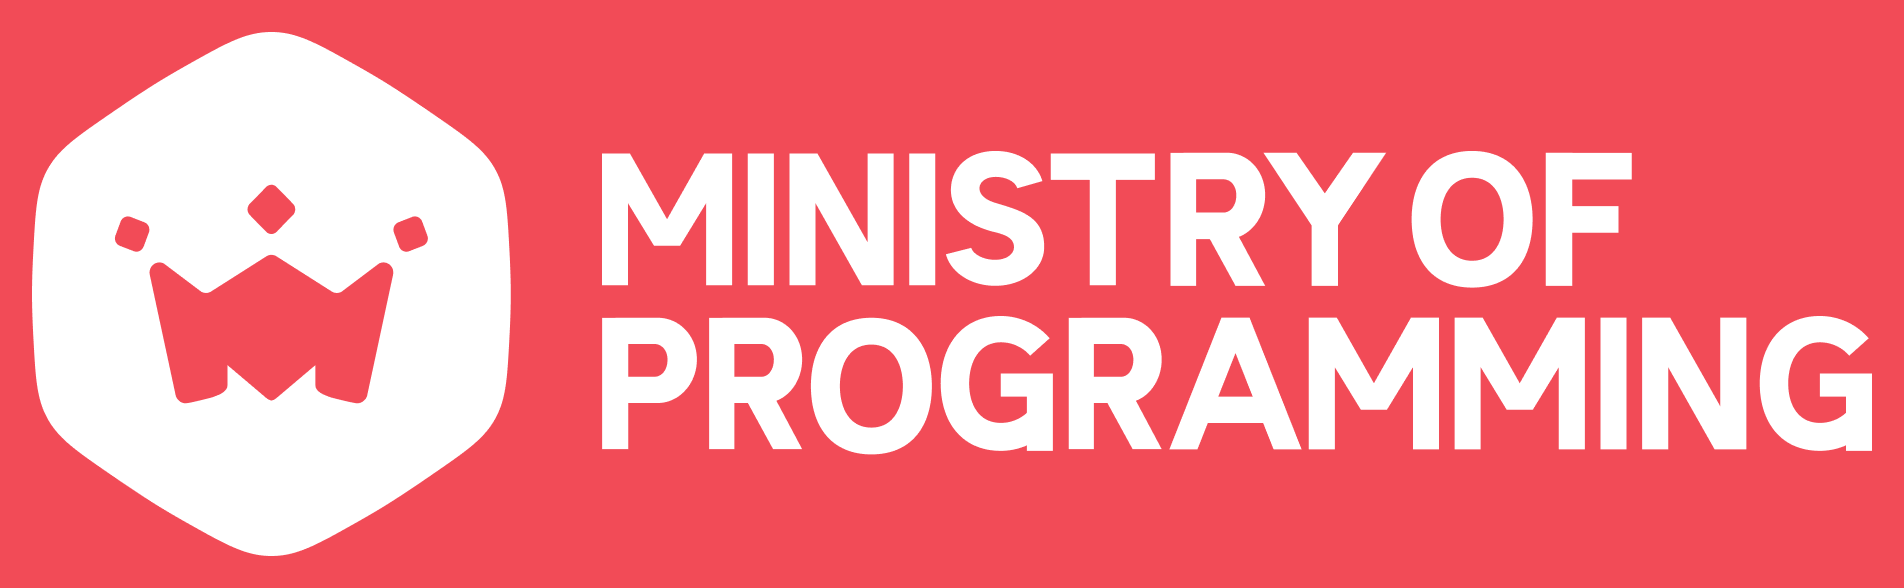 Ministry of Programming, MoP